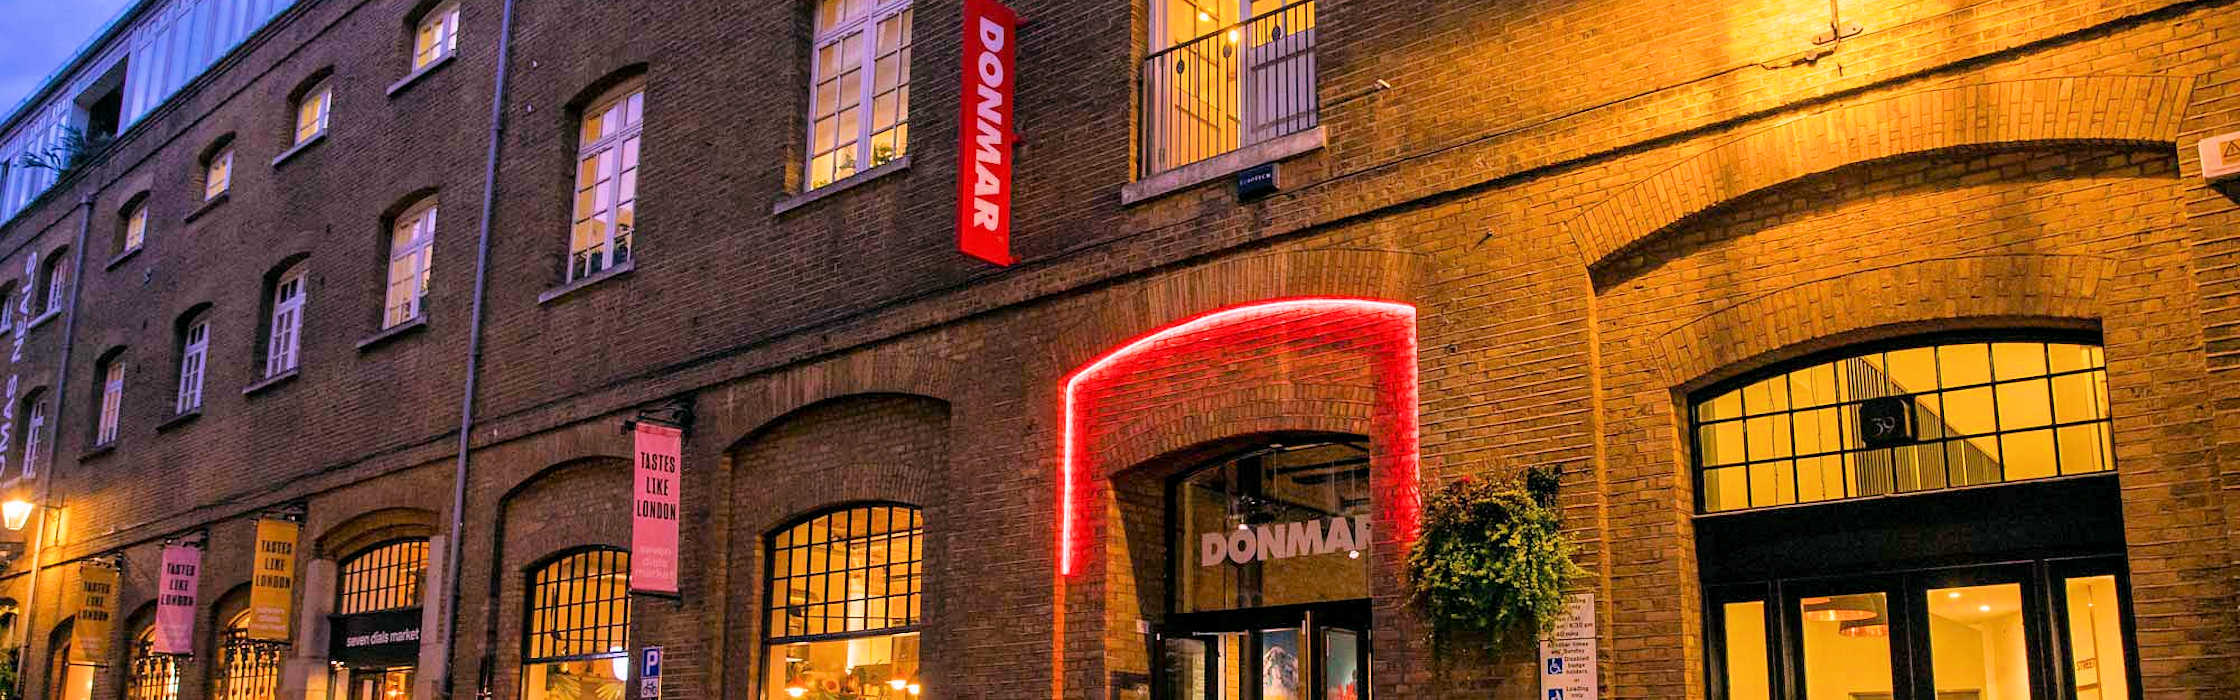 What's On at The Donmar Warehouse, London